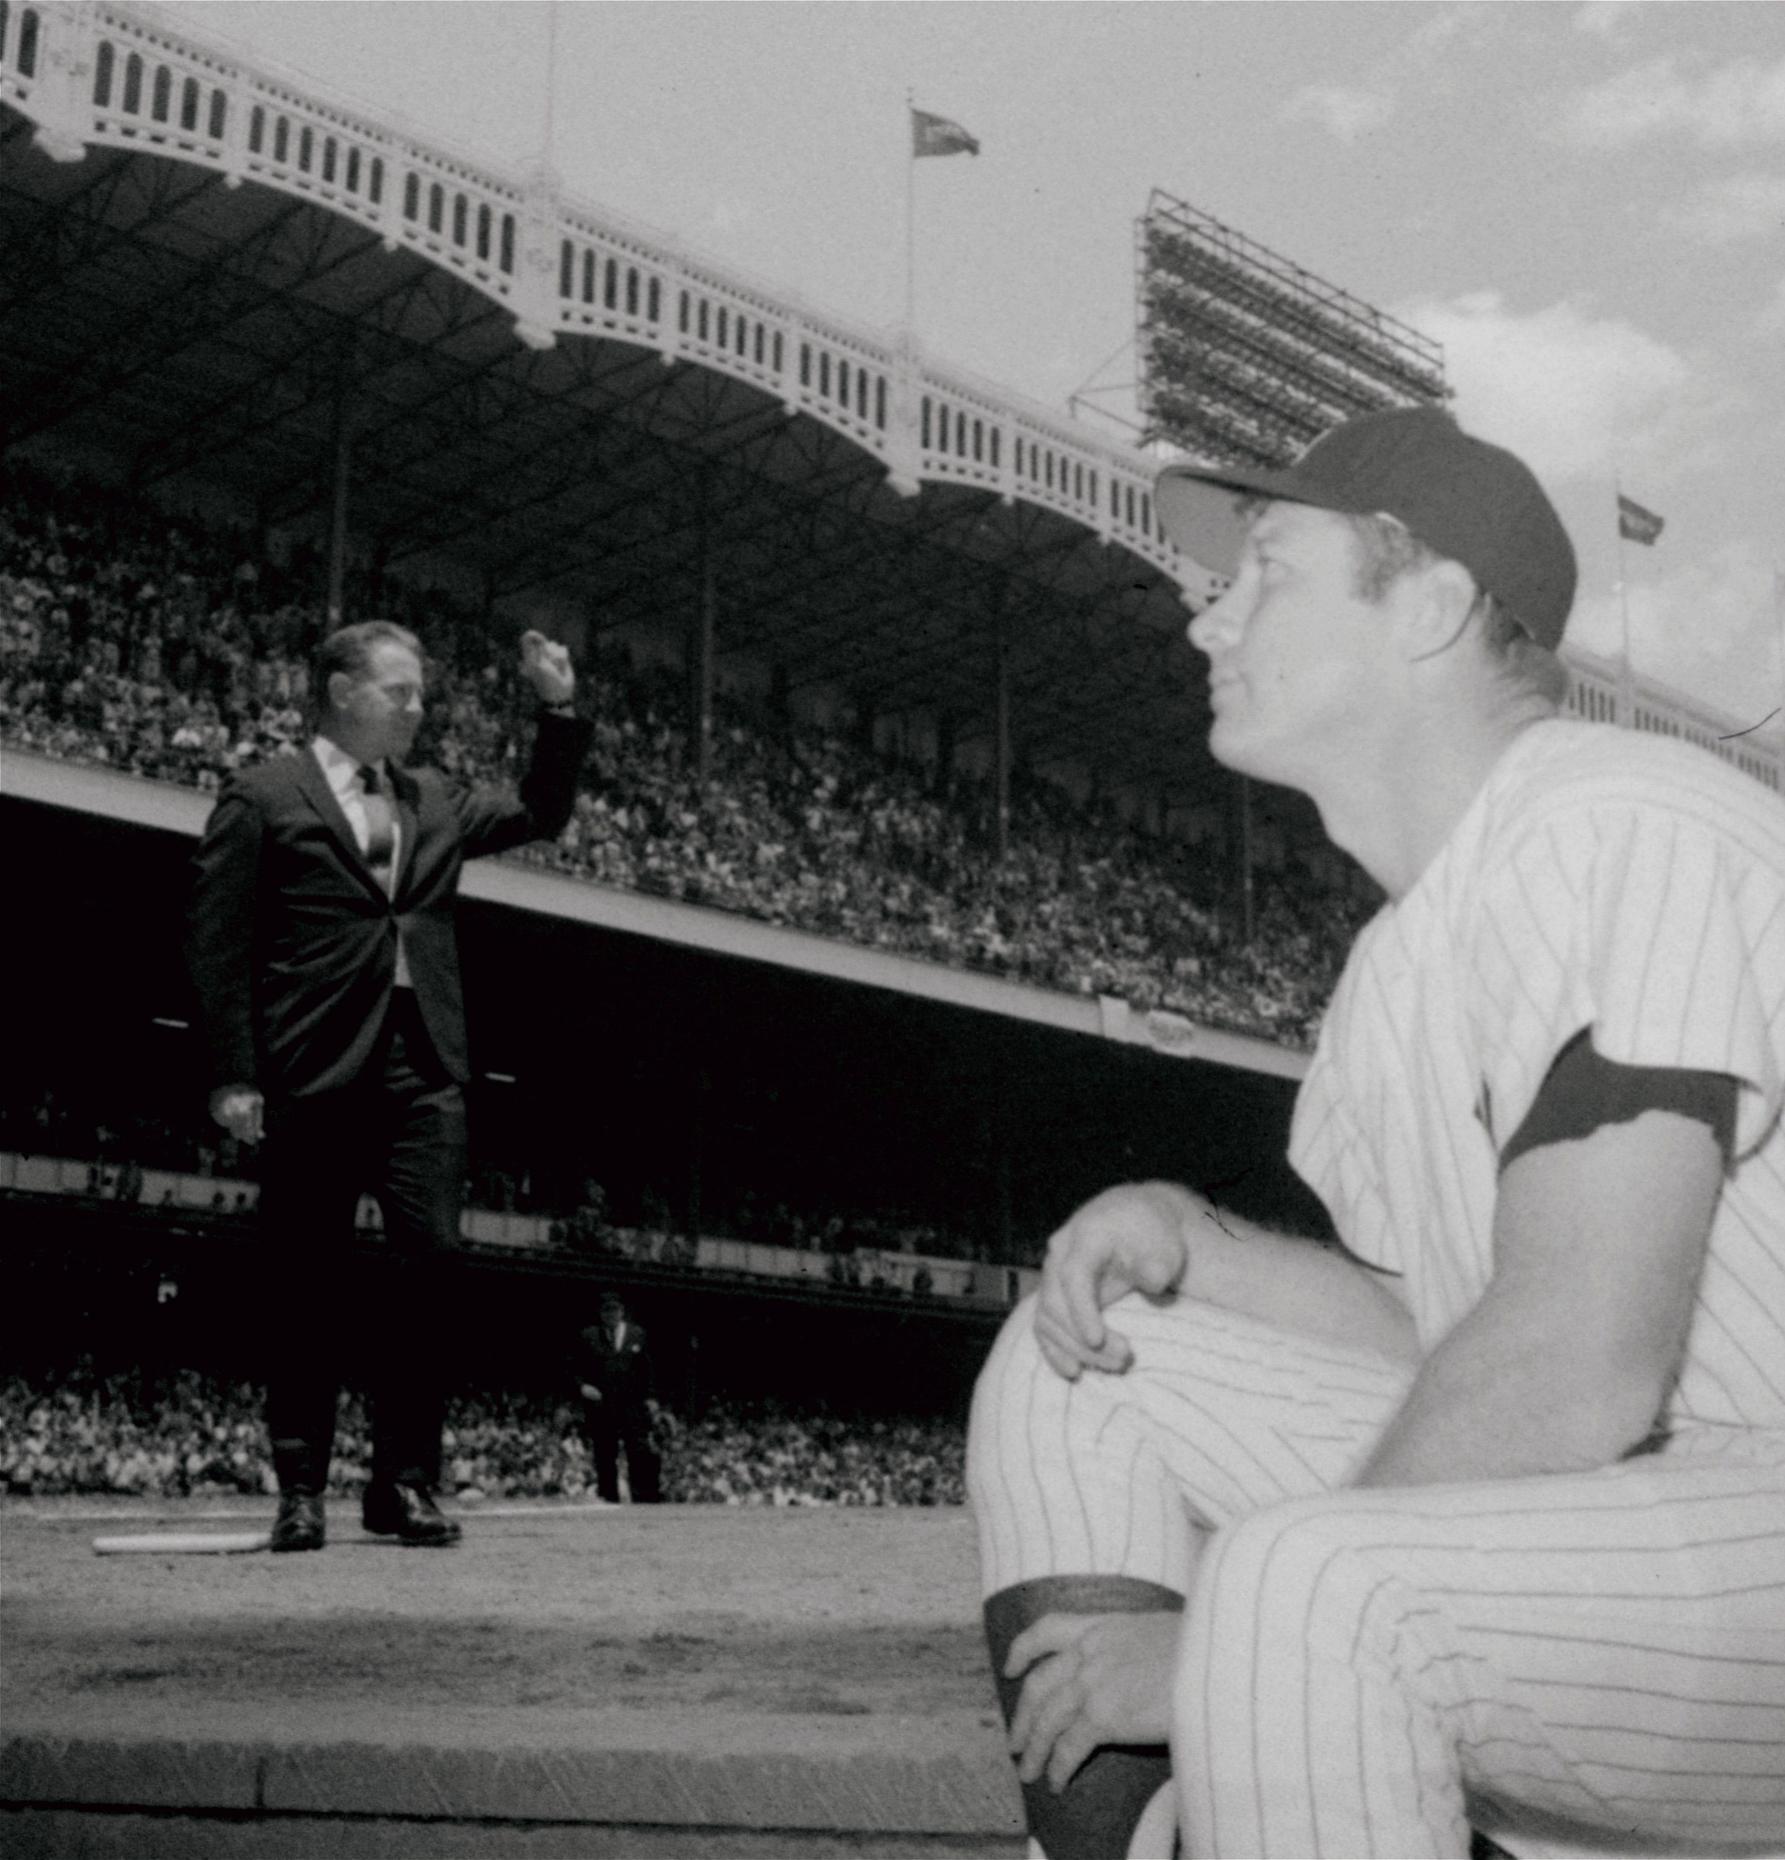 Remembering Whitey Ford, the winningest Yankee pitcher and World